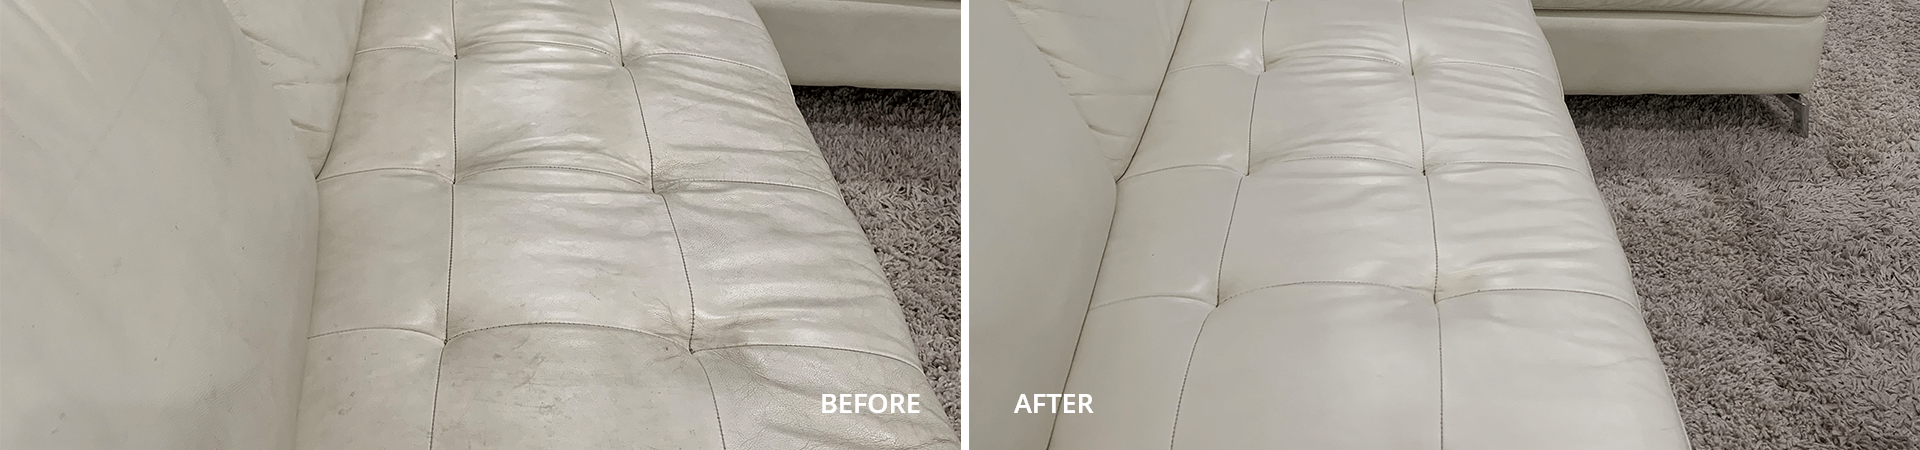 How to Clean and Condition Your Leather Lounge in Just Three Easy Steps